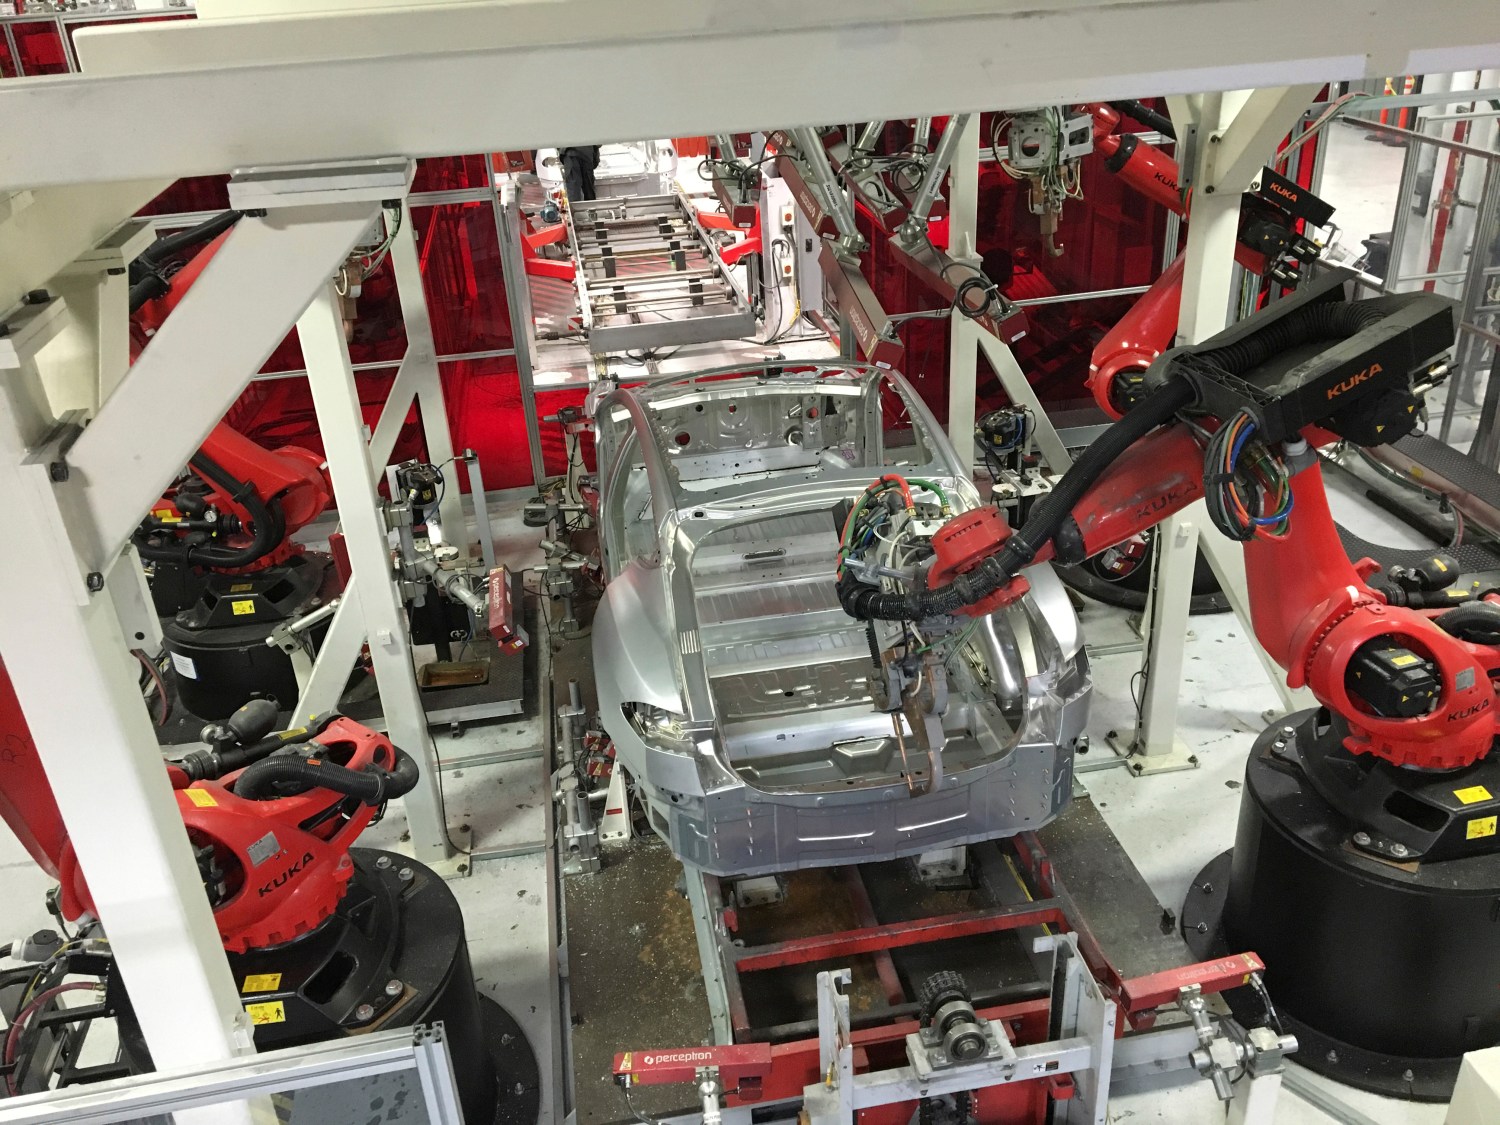 Tesla vehicles are being assembled by robots at Tesla Motors Inc factory in Fremont, California, U.S. on July 25, 2016. REUTERS/Joseph White/File Photo